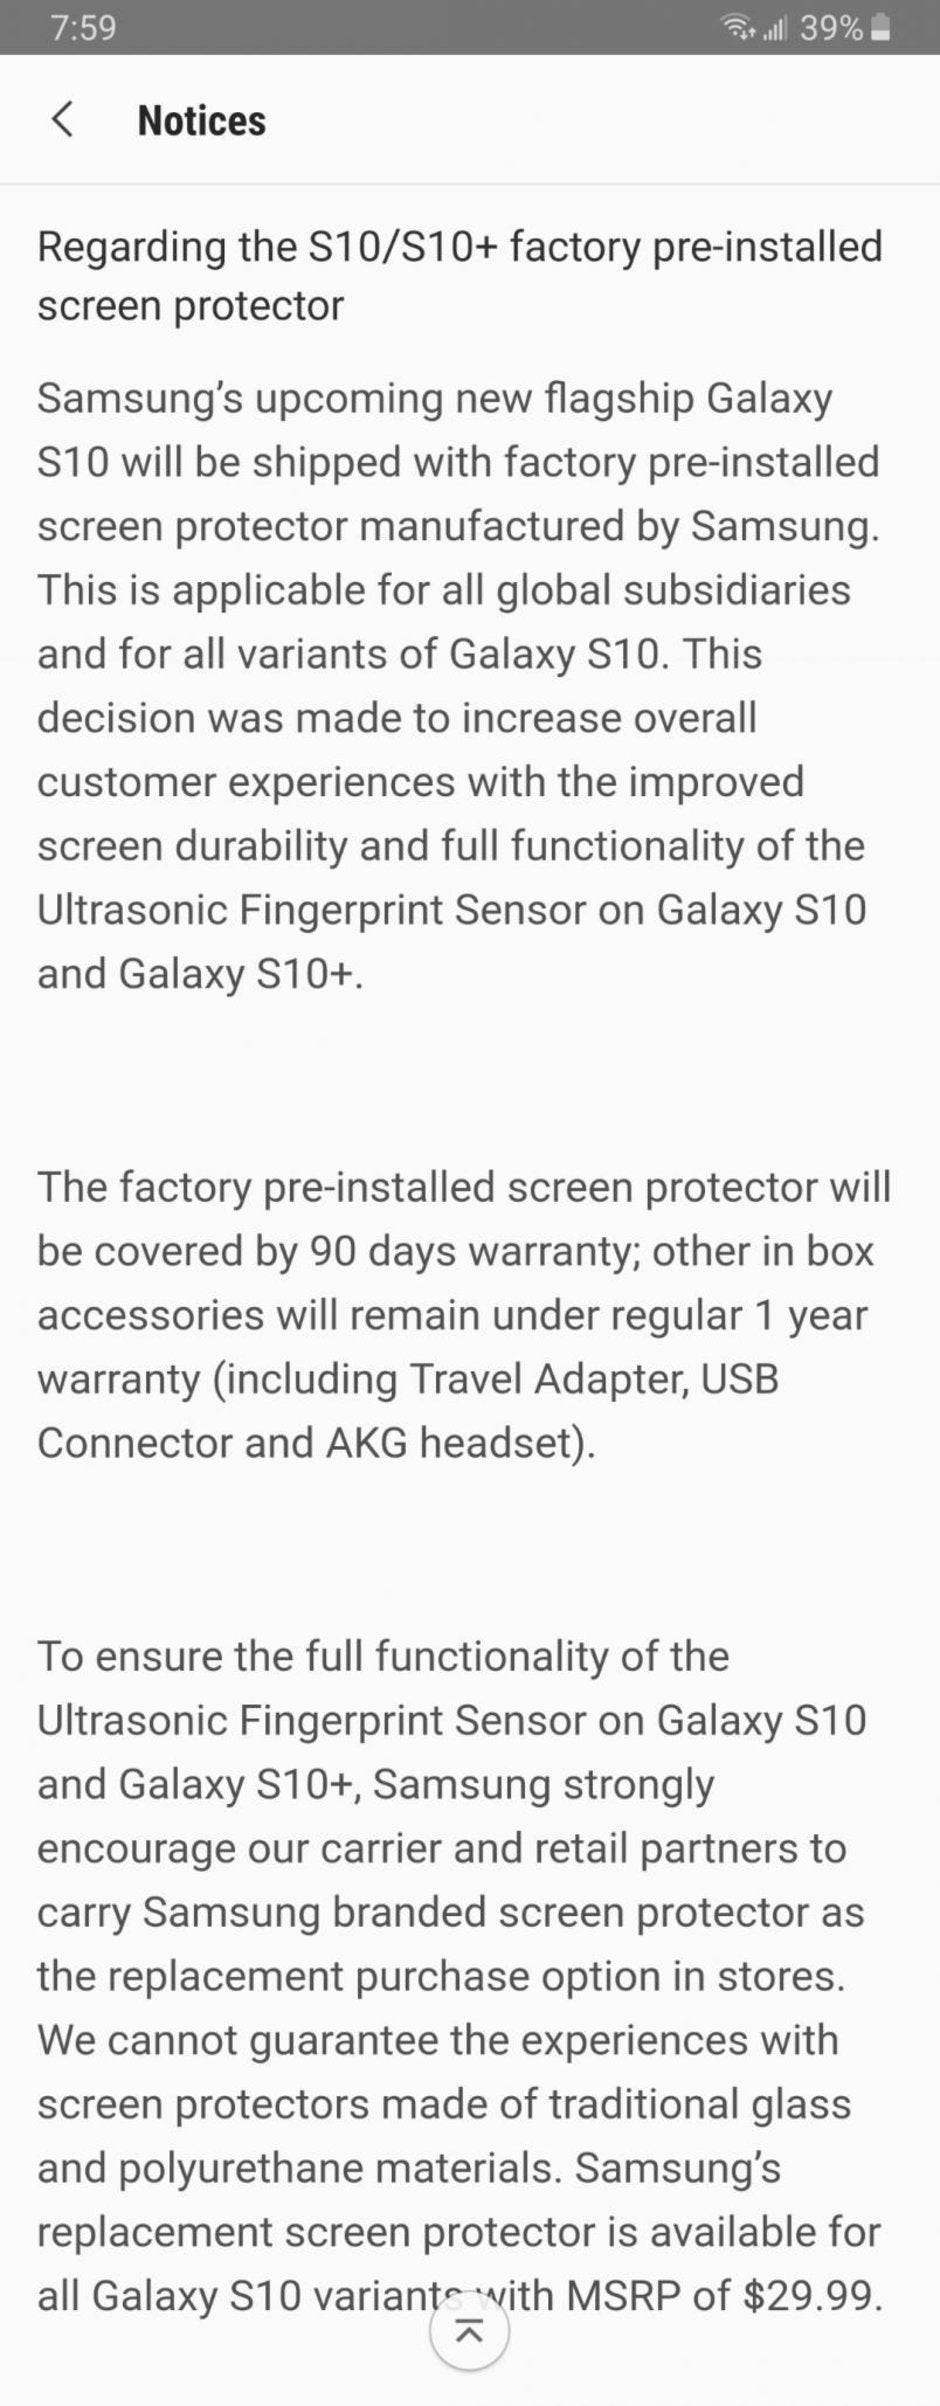 Samsung: the best Galaxy S10 screen protector comes pre-installed, don't mess it up